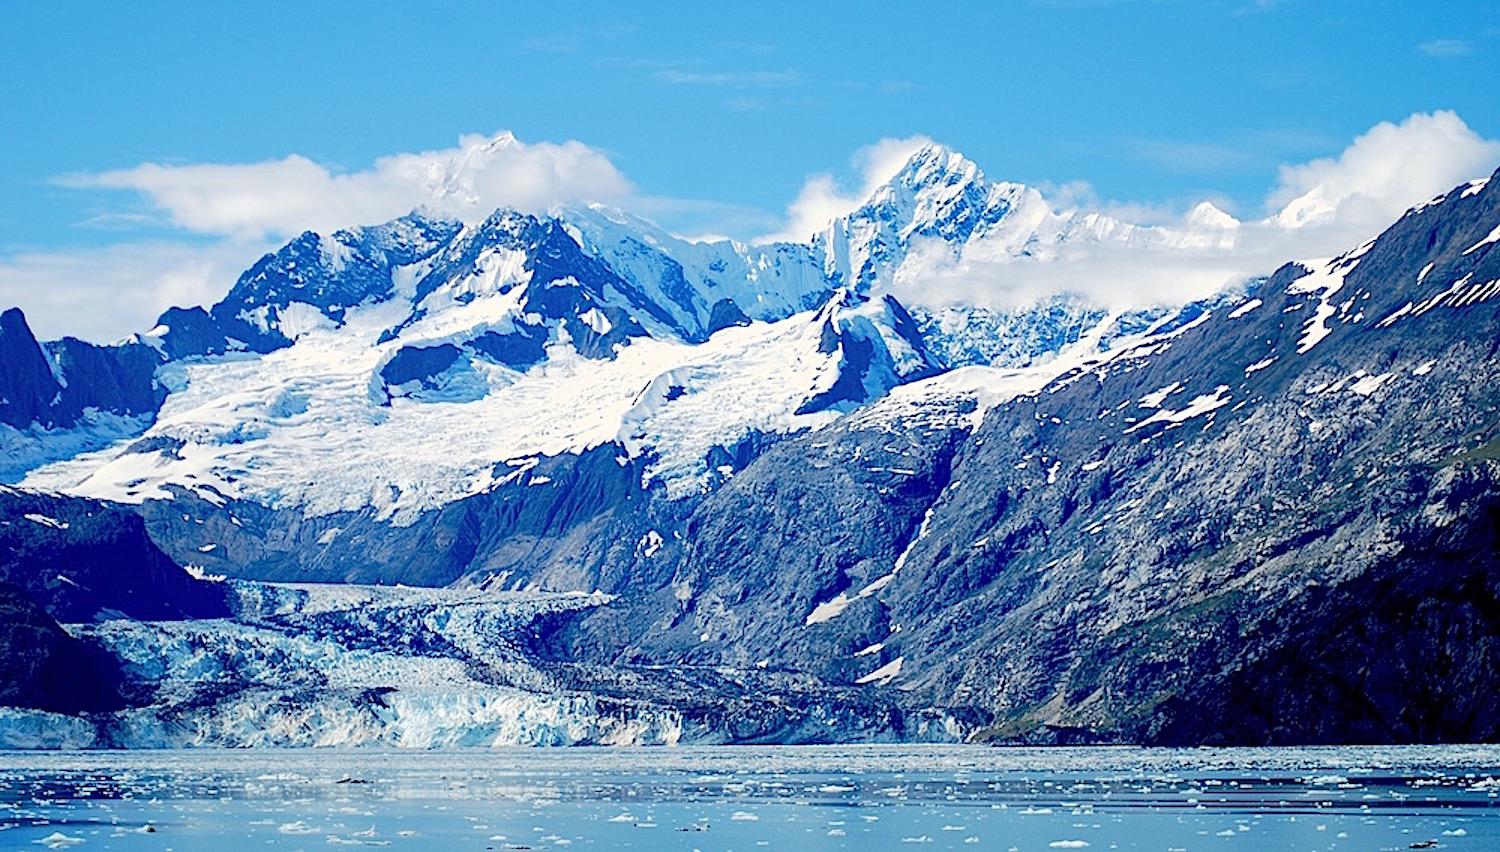 Continued retreat of tidewater glaciers at Glacier Bay National Park could force park staff to choose between protecting Johns Hopkins Bay for seal pupping or to open more of it up for cruise ships./Kurt Repanshek file